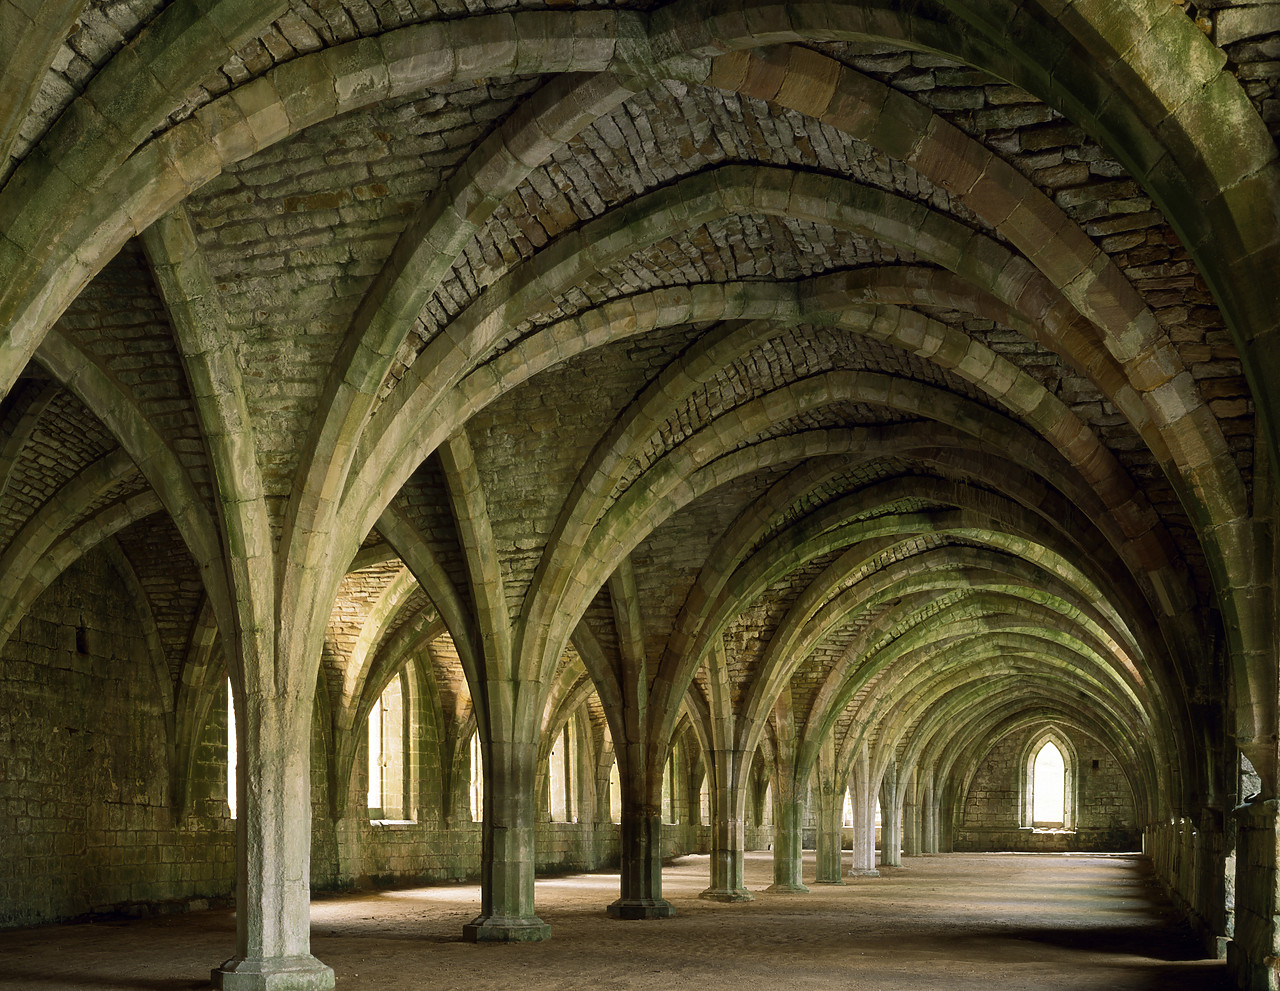 #913677 - Cloisters at Fountains Abbey, North Yorkshire, England